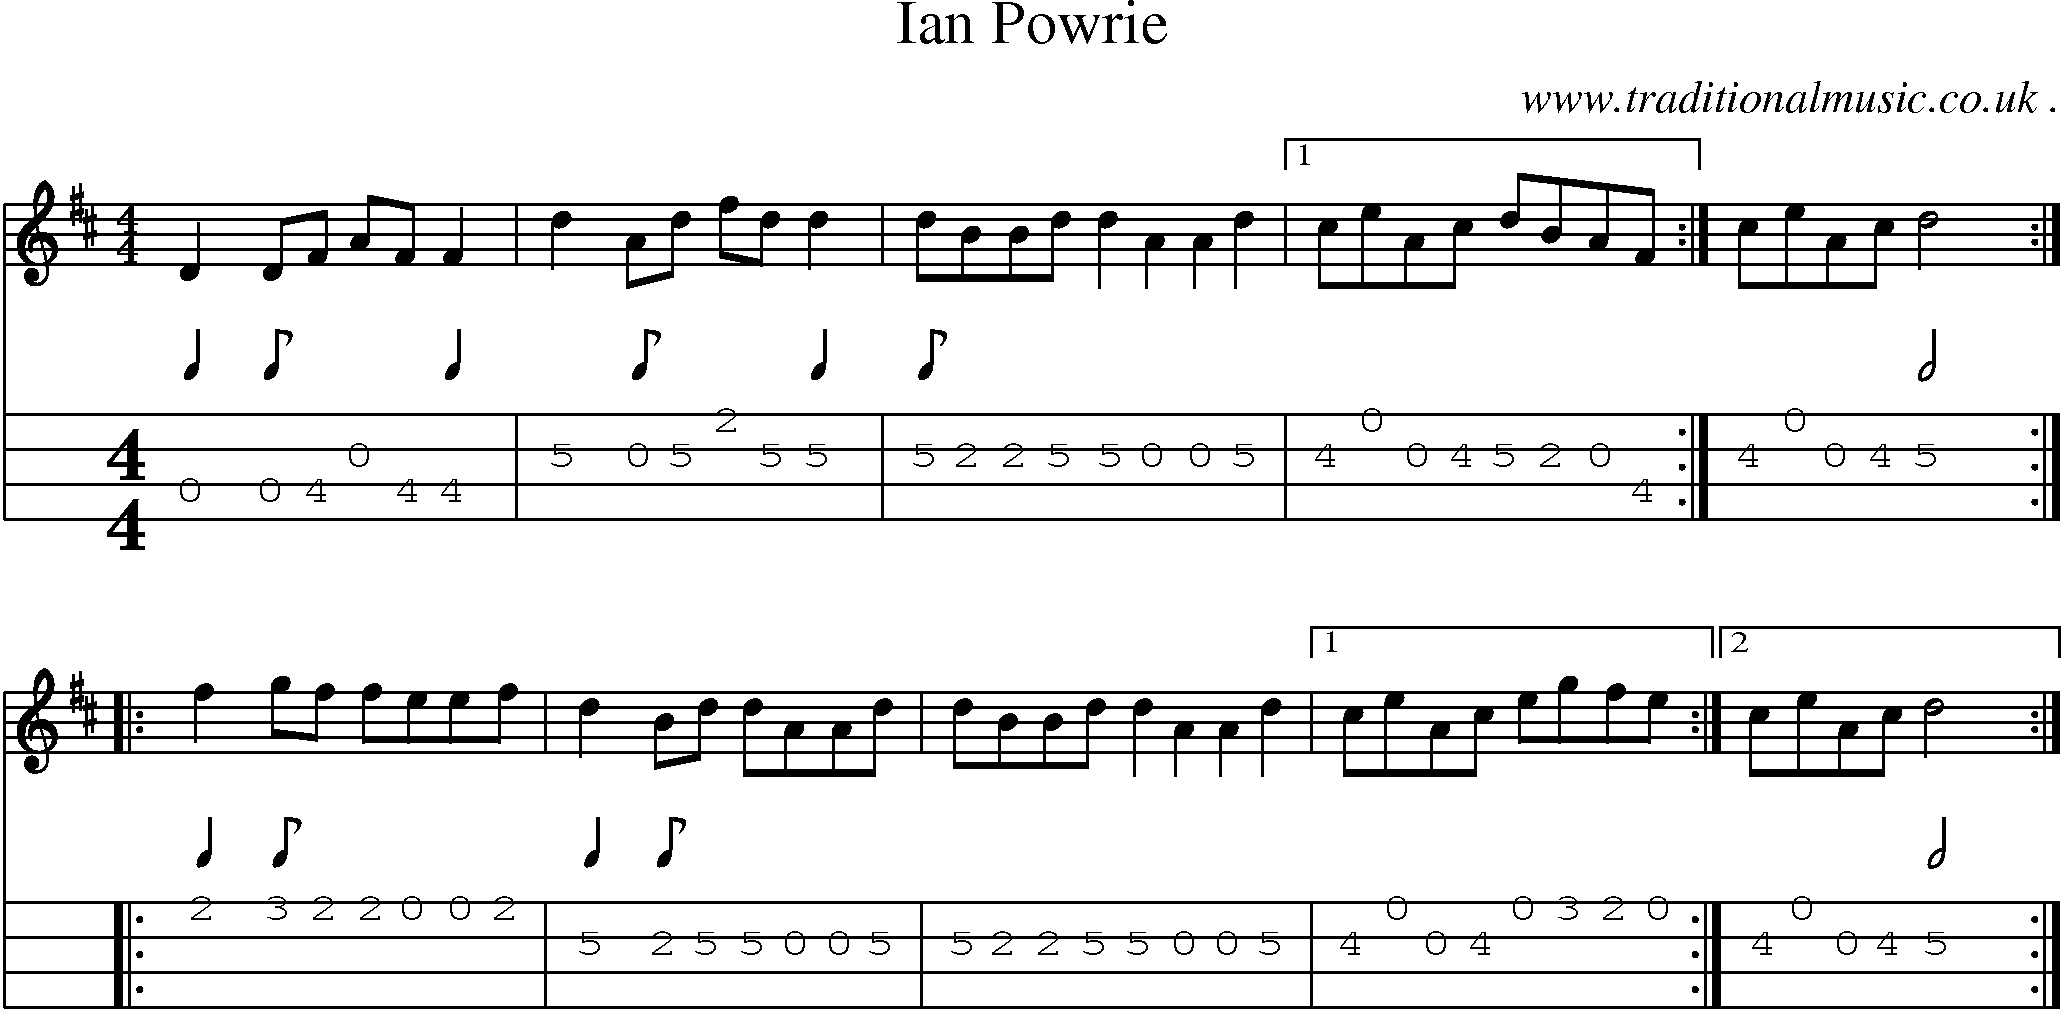 Sheet-music  score, Chords and Mandolin Tabs for Ian Powrie